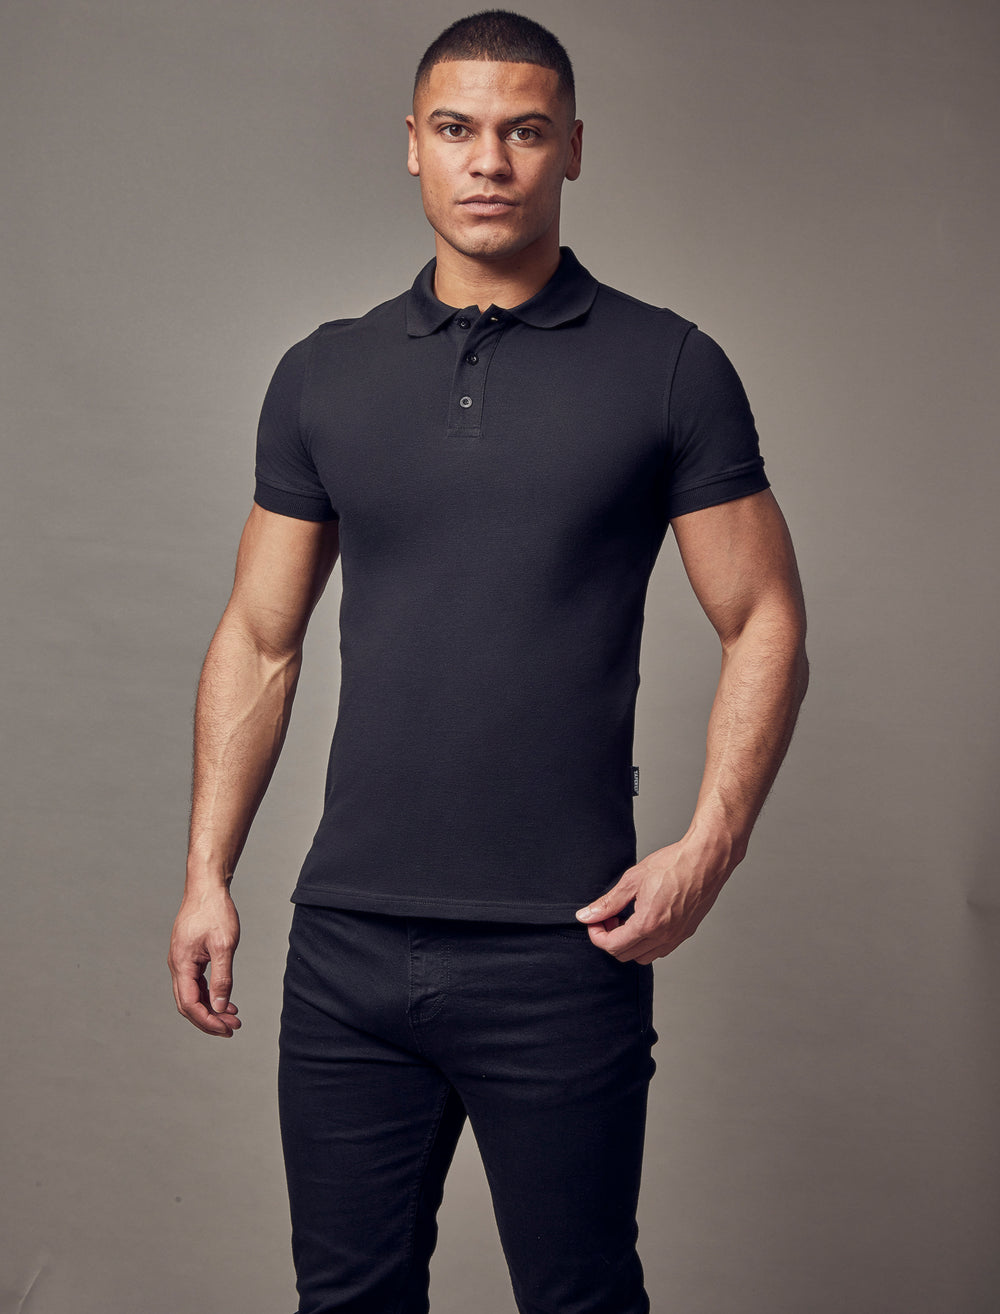 black muscle fit short sleeve polo shirt, highlighting the tapered fit and premium quality offered by Tapered Menswear